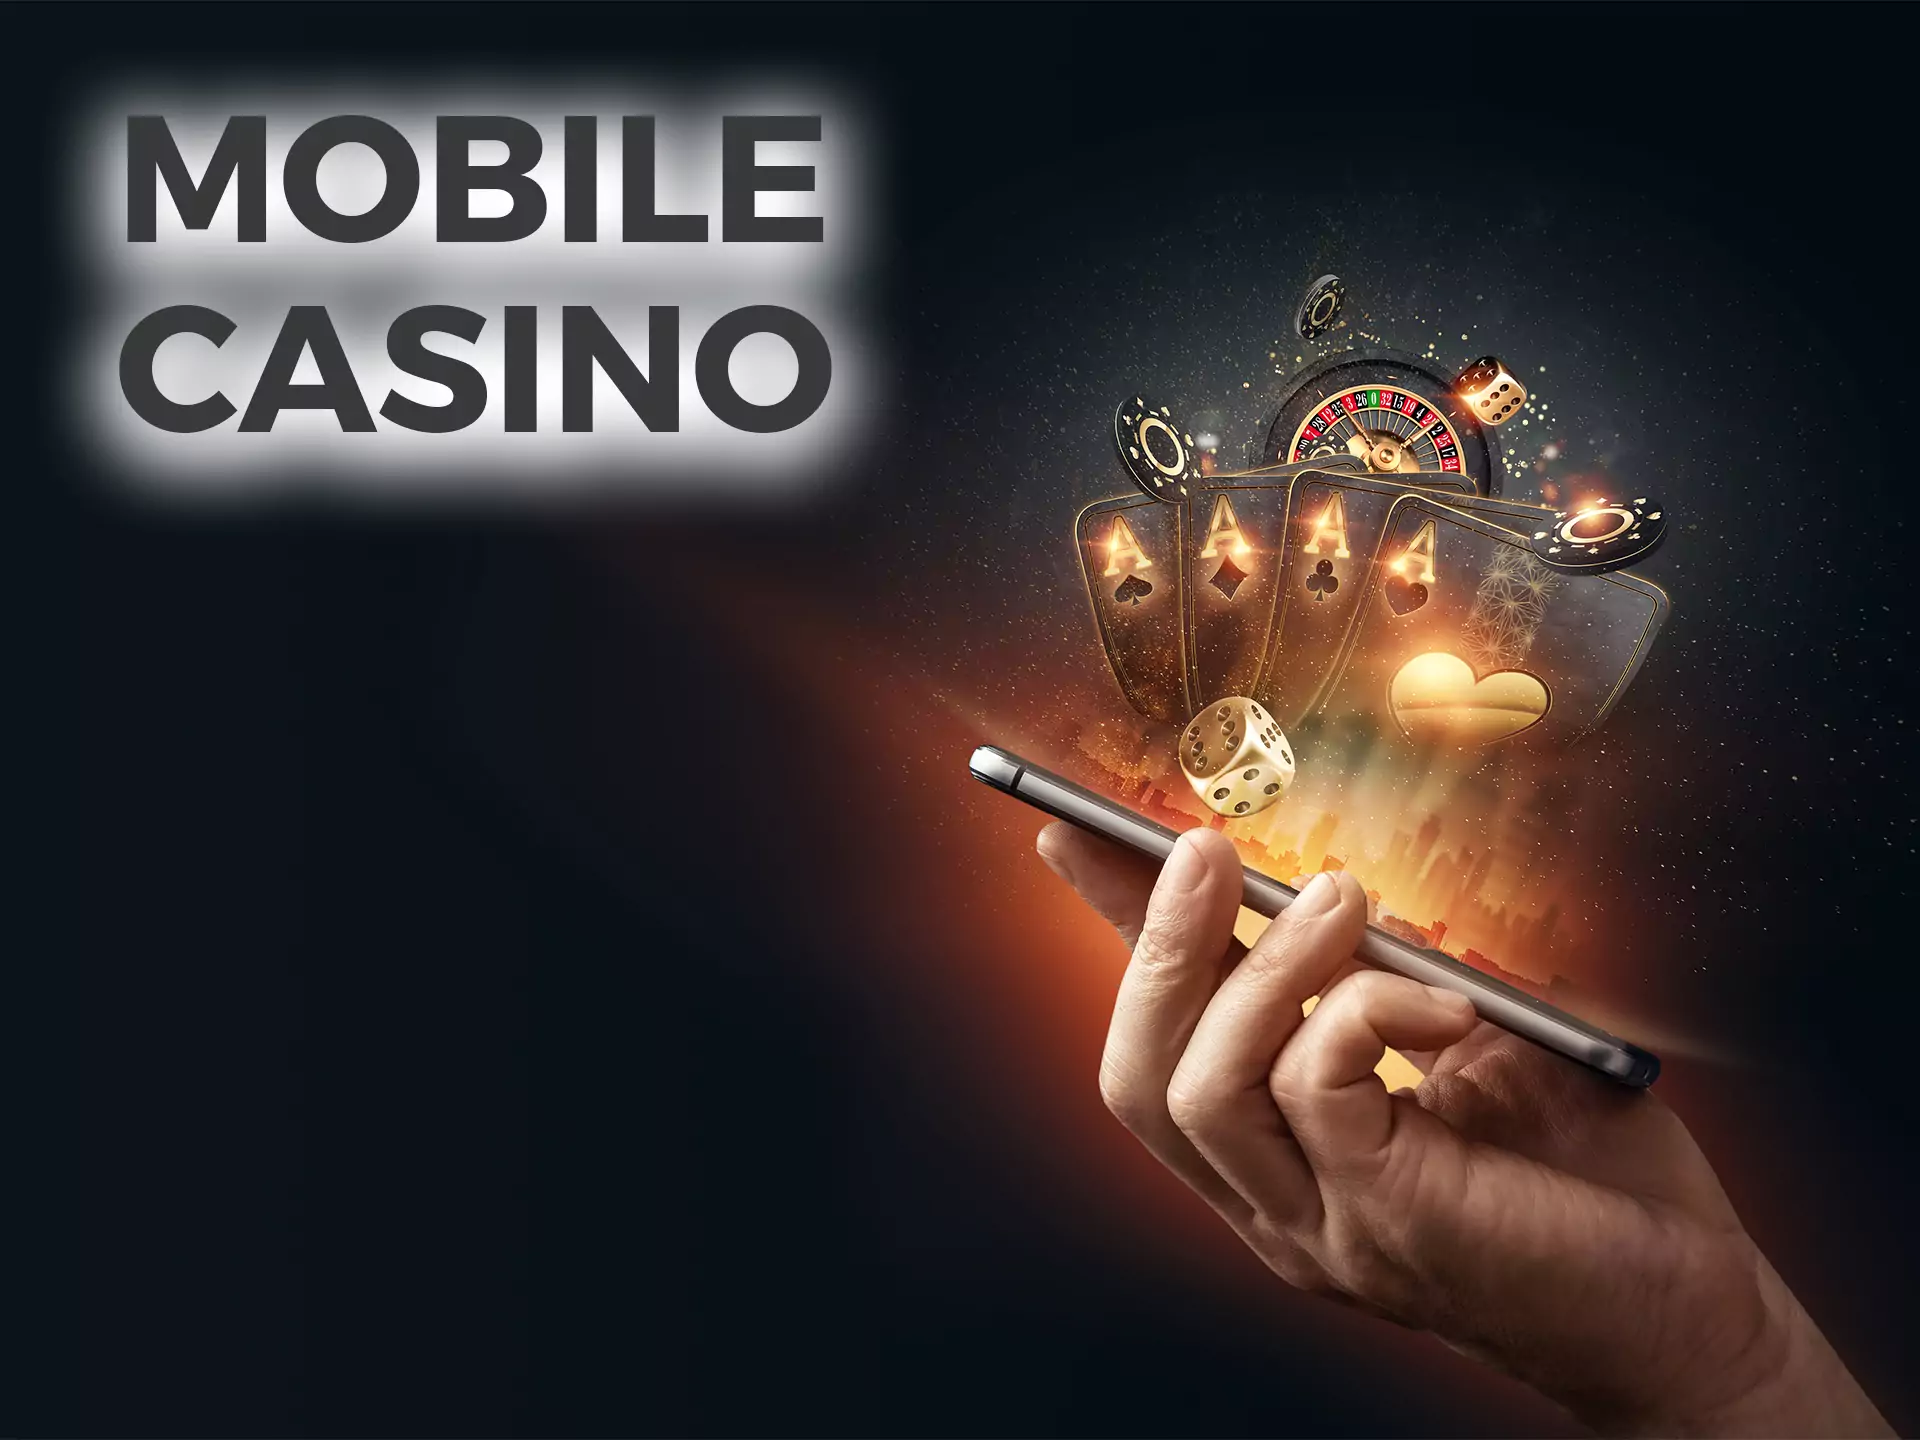 It's great of you can play casino games via the mobile app.